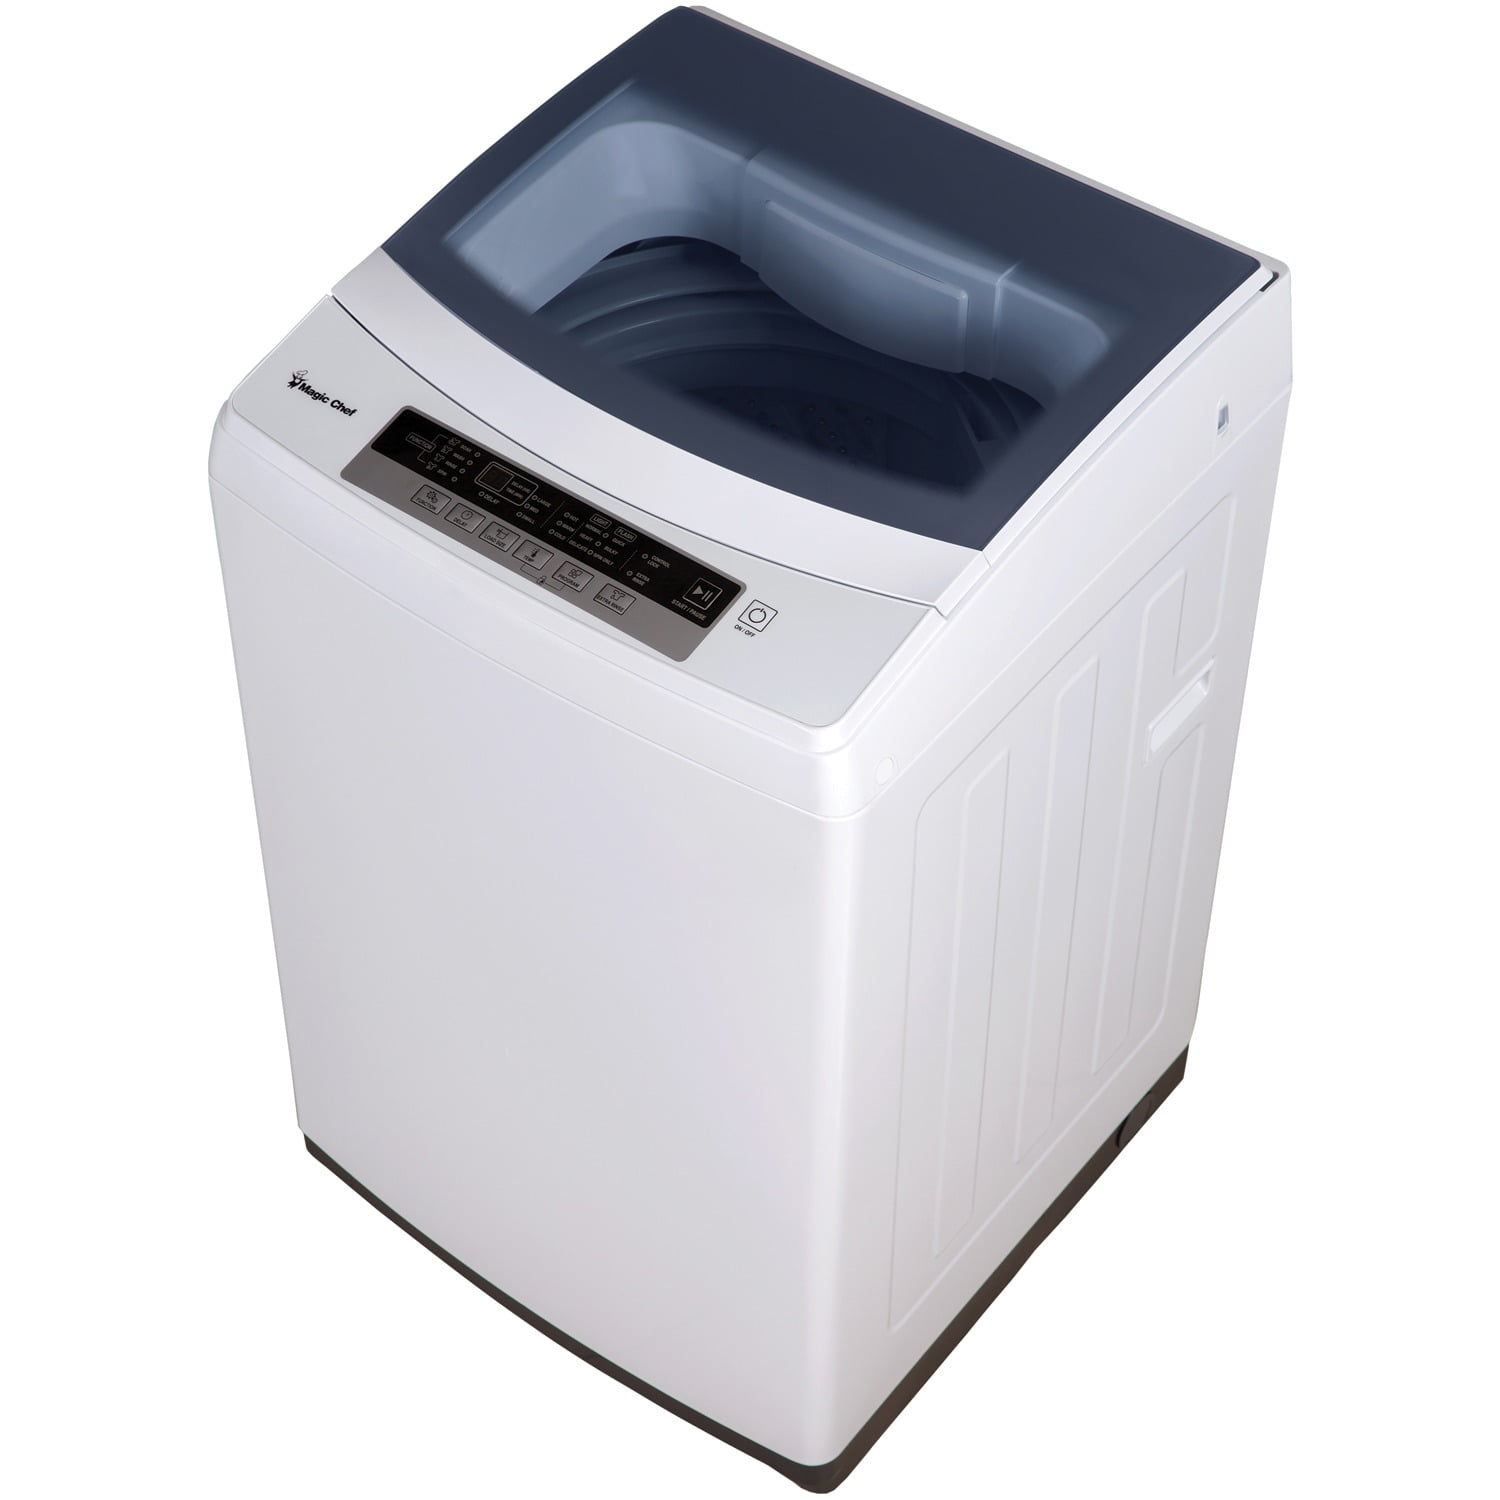 MAGIC CHEF Compact TopLoad Washer White Electric Portable AutoShut Off Laundry 665679018208 eBay